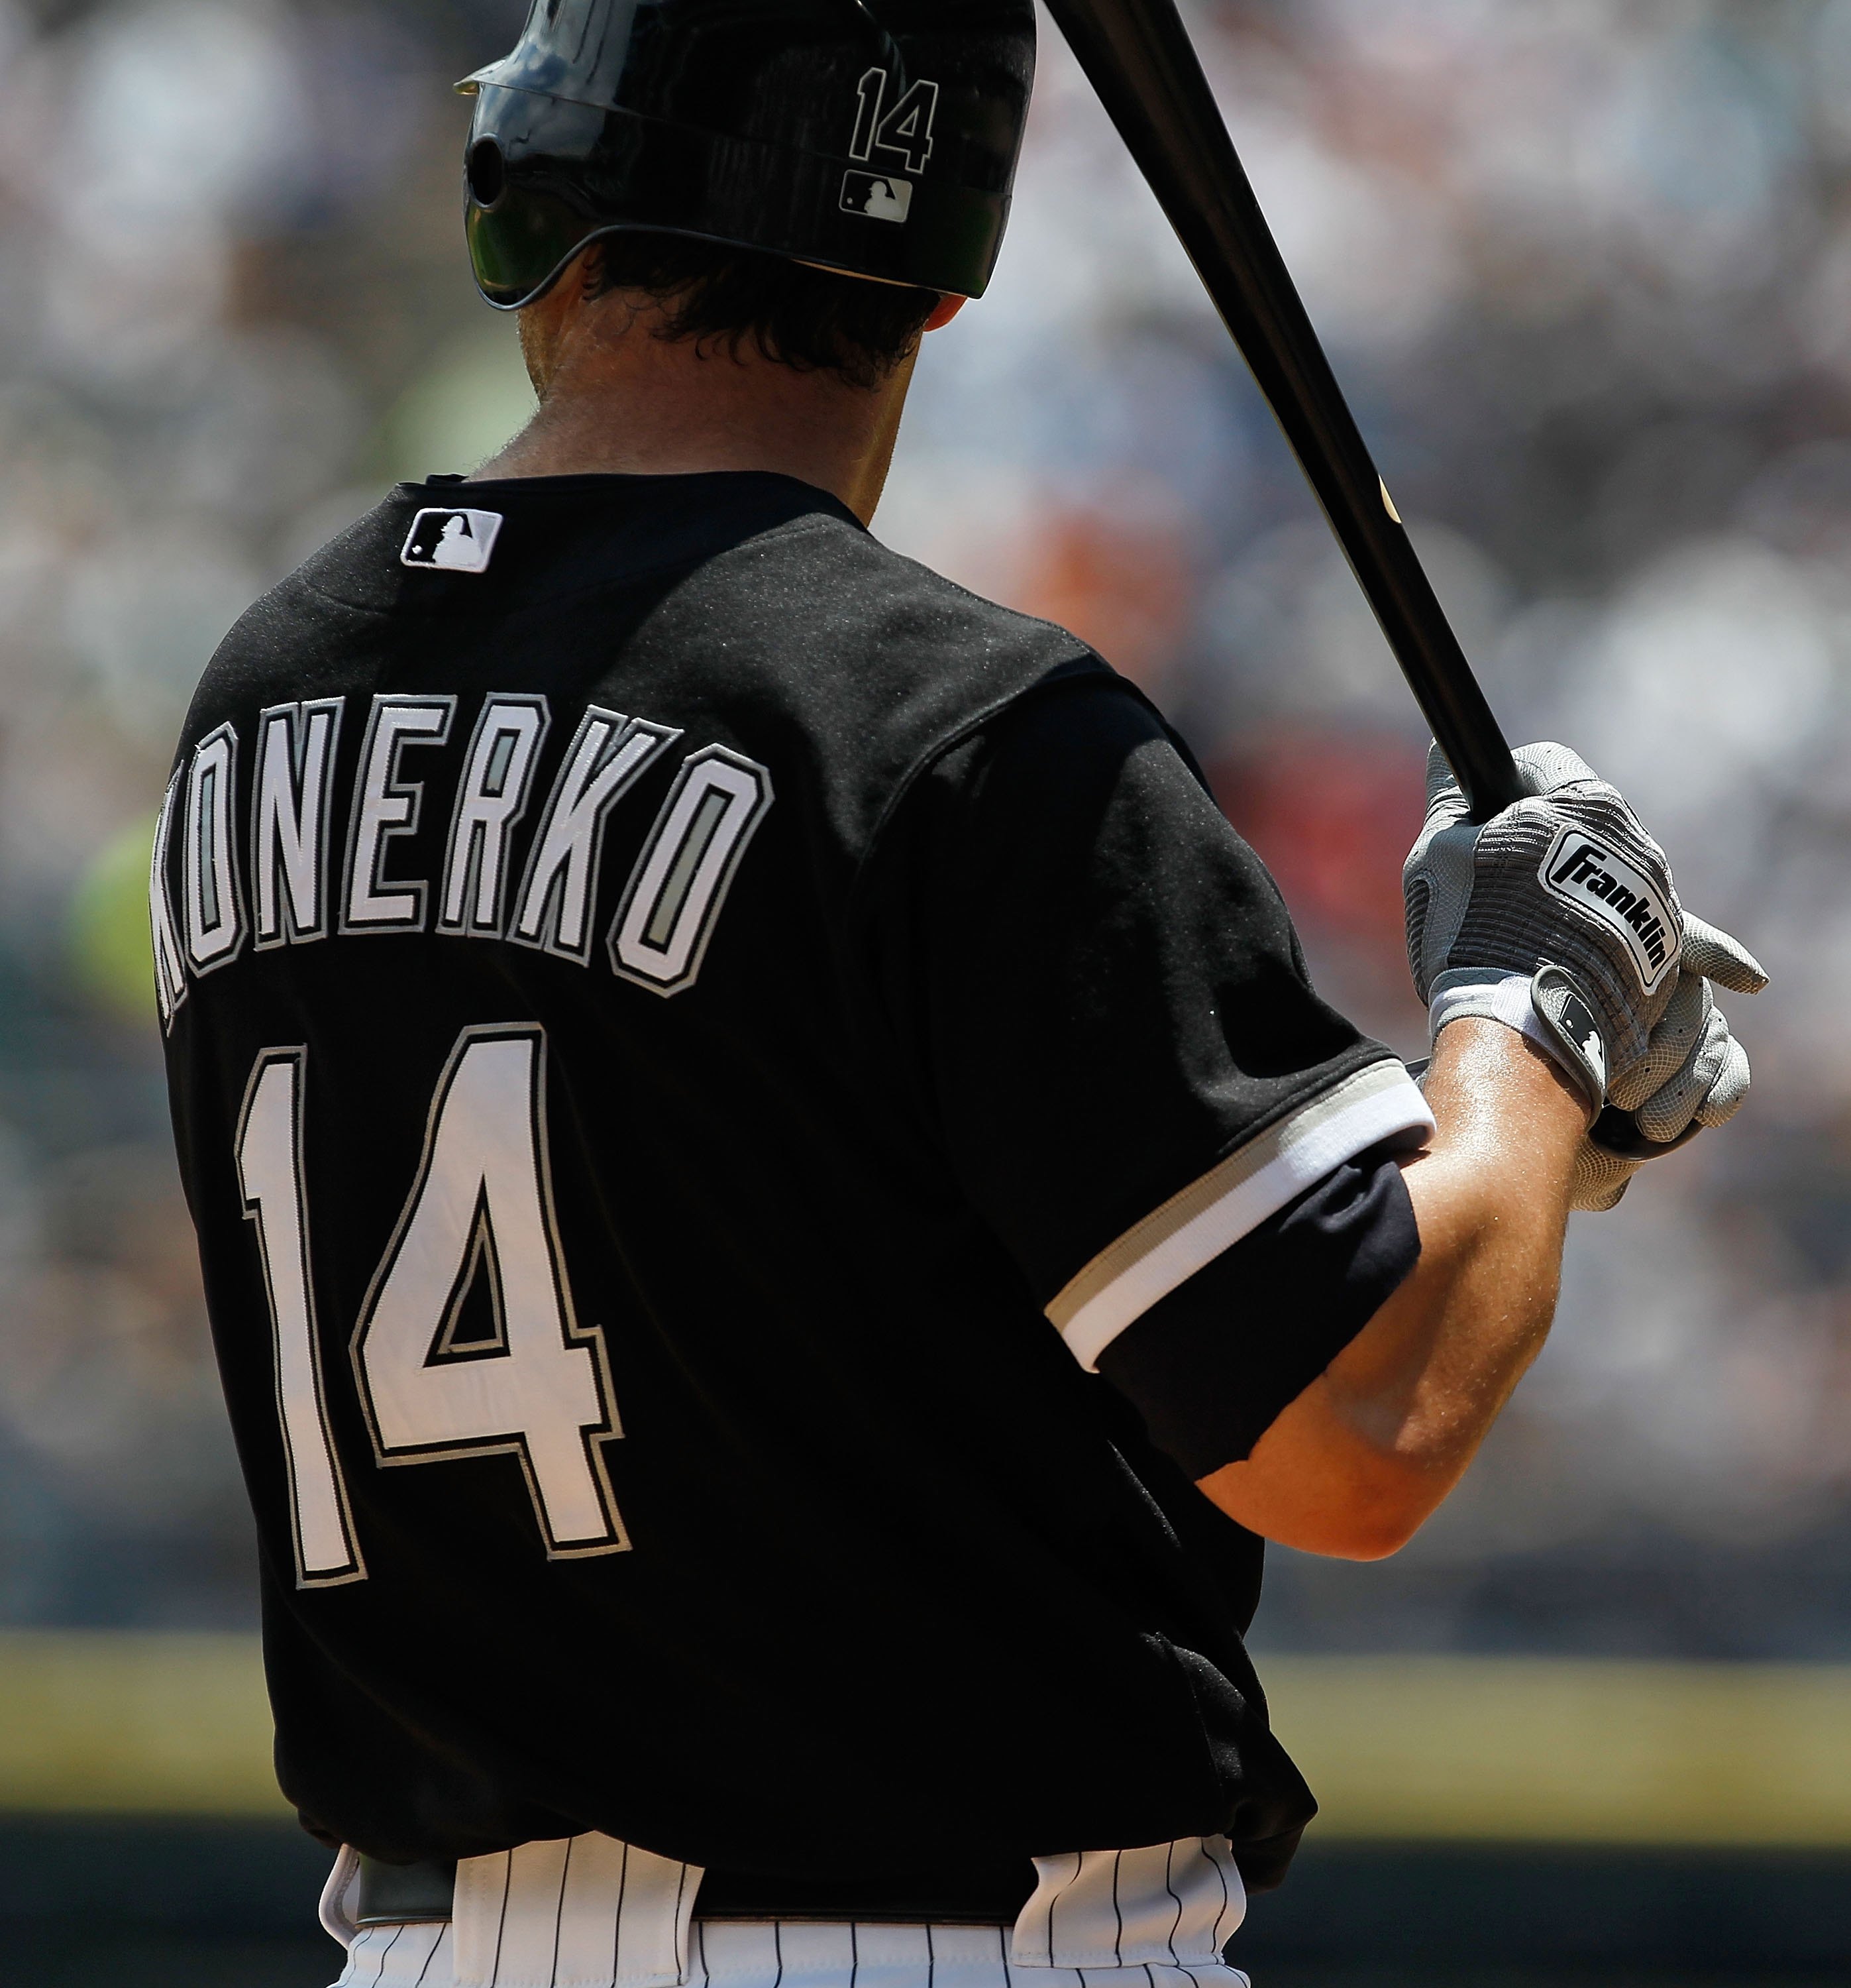 White Sox activate Paul Konerko from the disabled list - NBC Sports